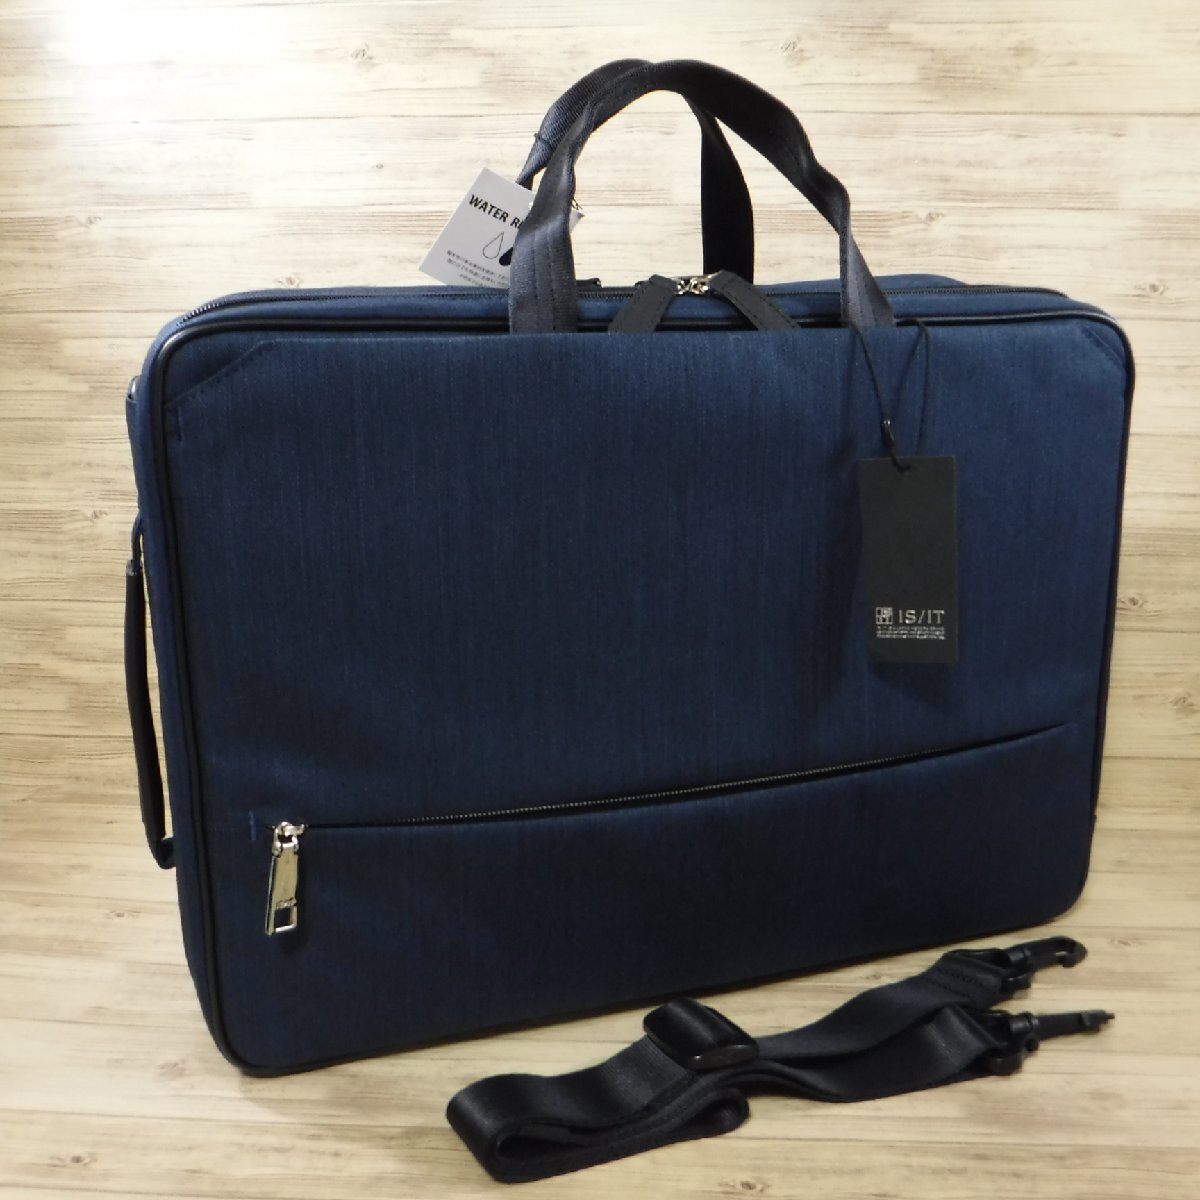 BB837izito regular price 41800 jpy 3WAY business bag rucksack . body type water-repellent 2in1 Dub Leroux mB4 new goods IS/IT business rucksack 962505 navy blue 